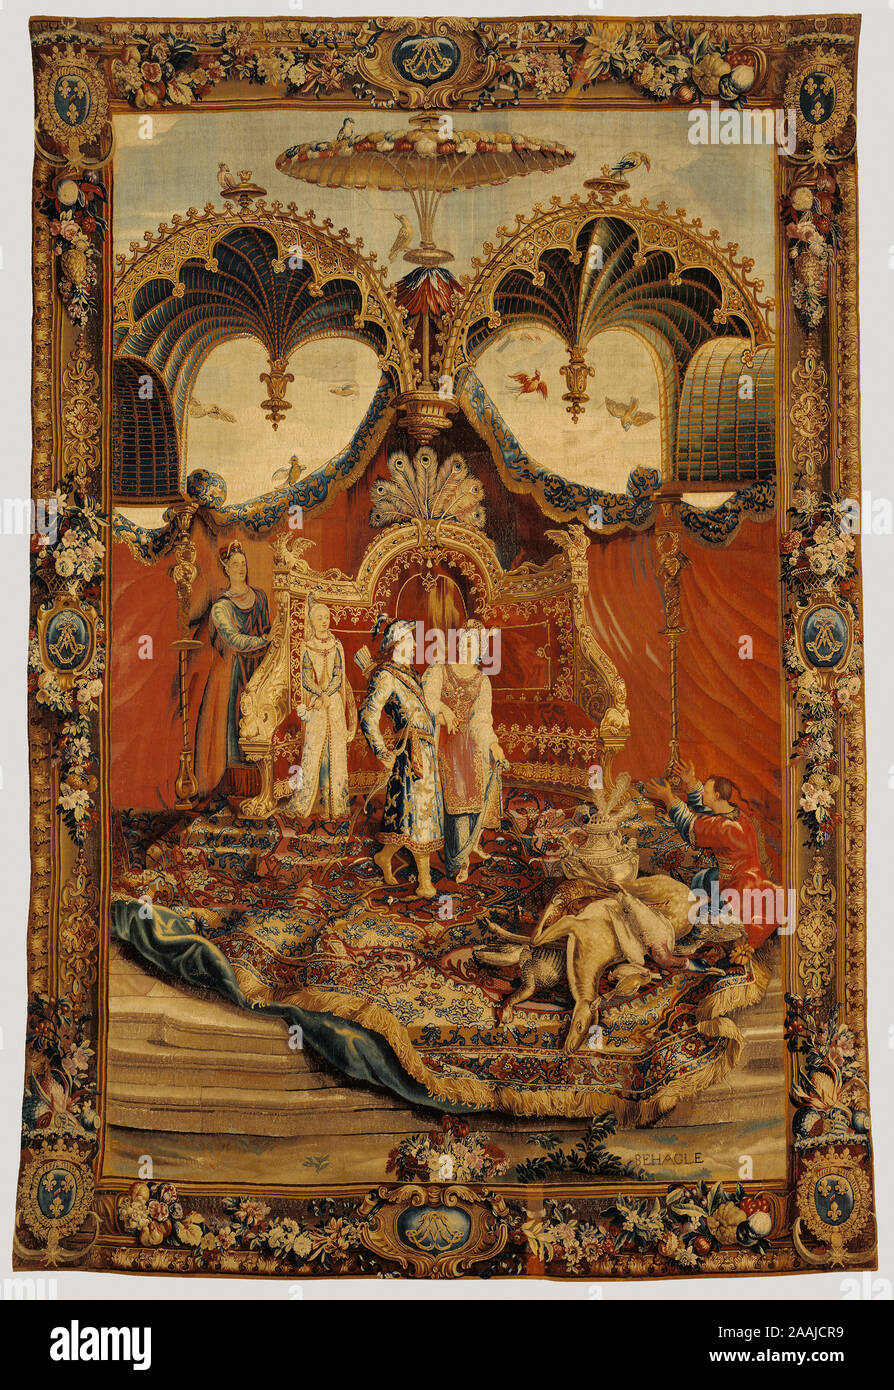 Tapestry: The Return from the Hunt from The Story of the Emperor of China Series; After cartoons by Guy-Louis Vernansal (French, 1648 - 1729), and Jean-Baptiste Monnoyer (French, 1636 - 1699), and Jean-Baptiste Belin de Fontenay (French, 1653 - 1715), Beauvais Manufactory (French, founded 1664), woven under the direction of Philippe Béhagle (French, 1641 - 1705); Beauvais, France; about 1697 - 1705; Wool and silk; modern cotton lining; 421.4 x 290 cm (165 7/8 x 114 3/16 in.) Stock Photo